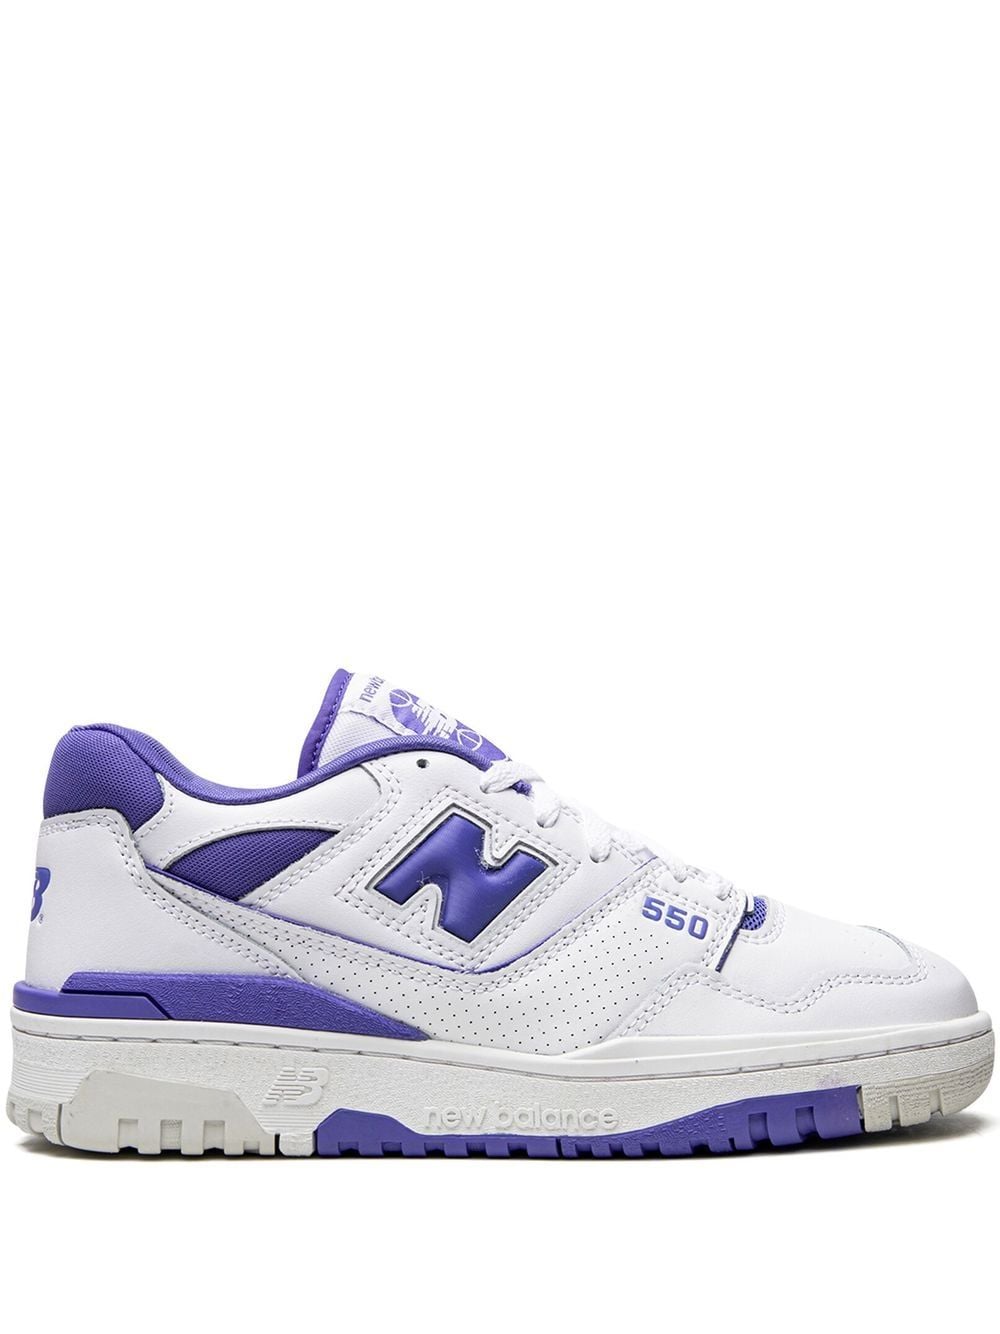 New Balance 550 "Aura Purple" low-top sneakers - White